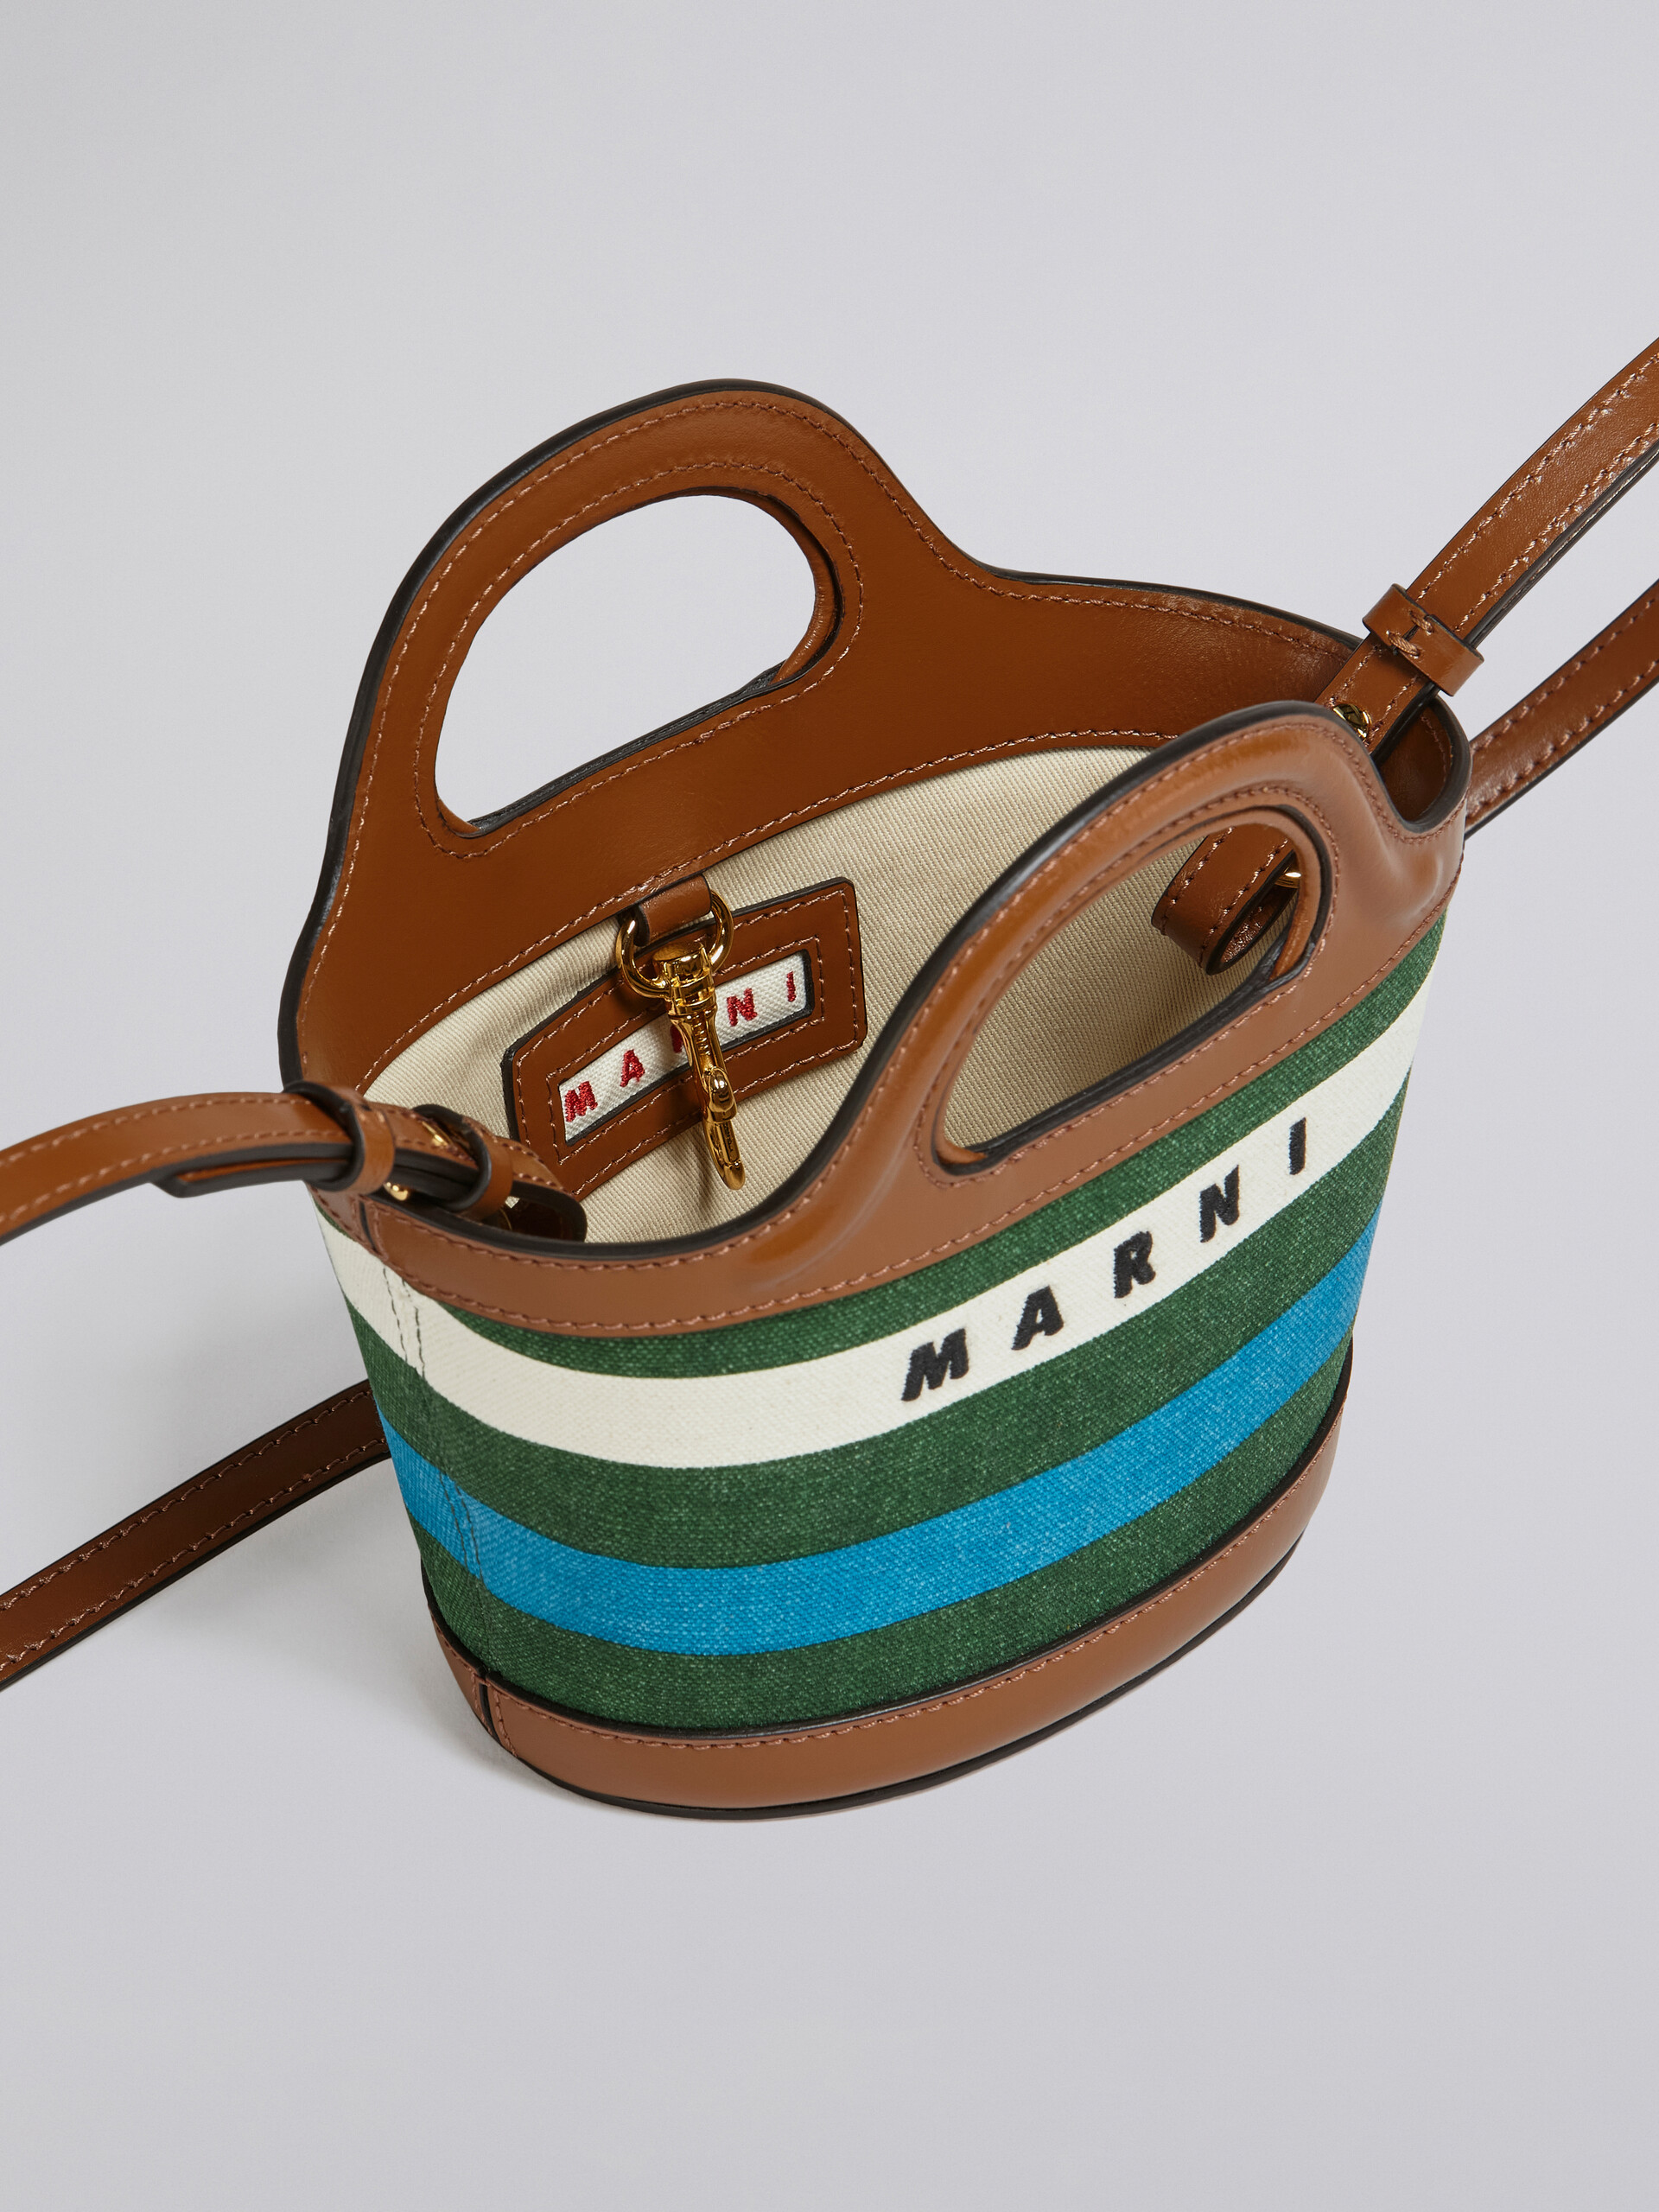 TROPICALIA micro bag in leather and striped canvas - Handbags - Image 4